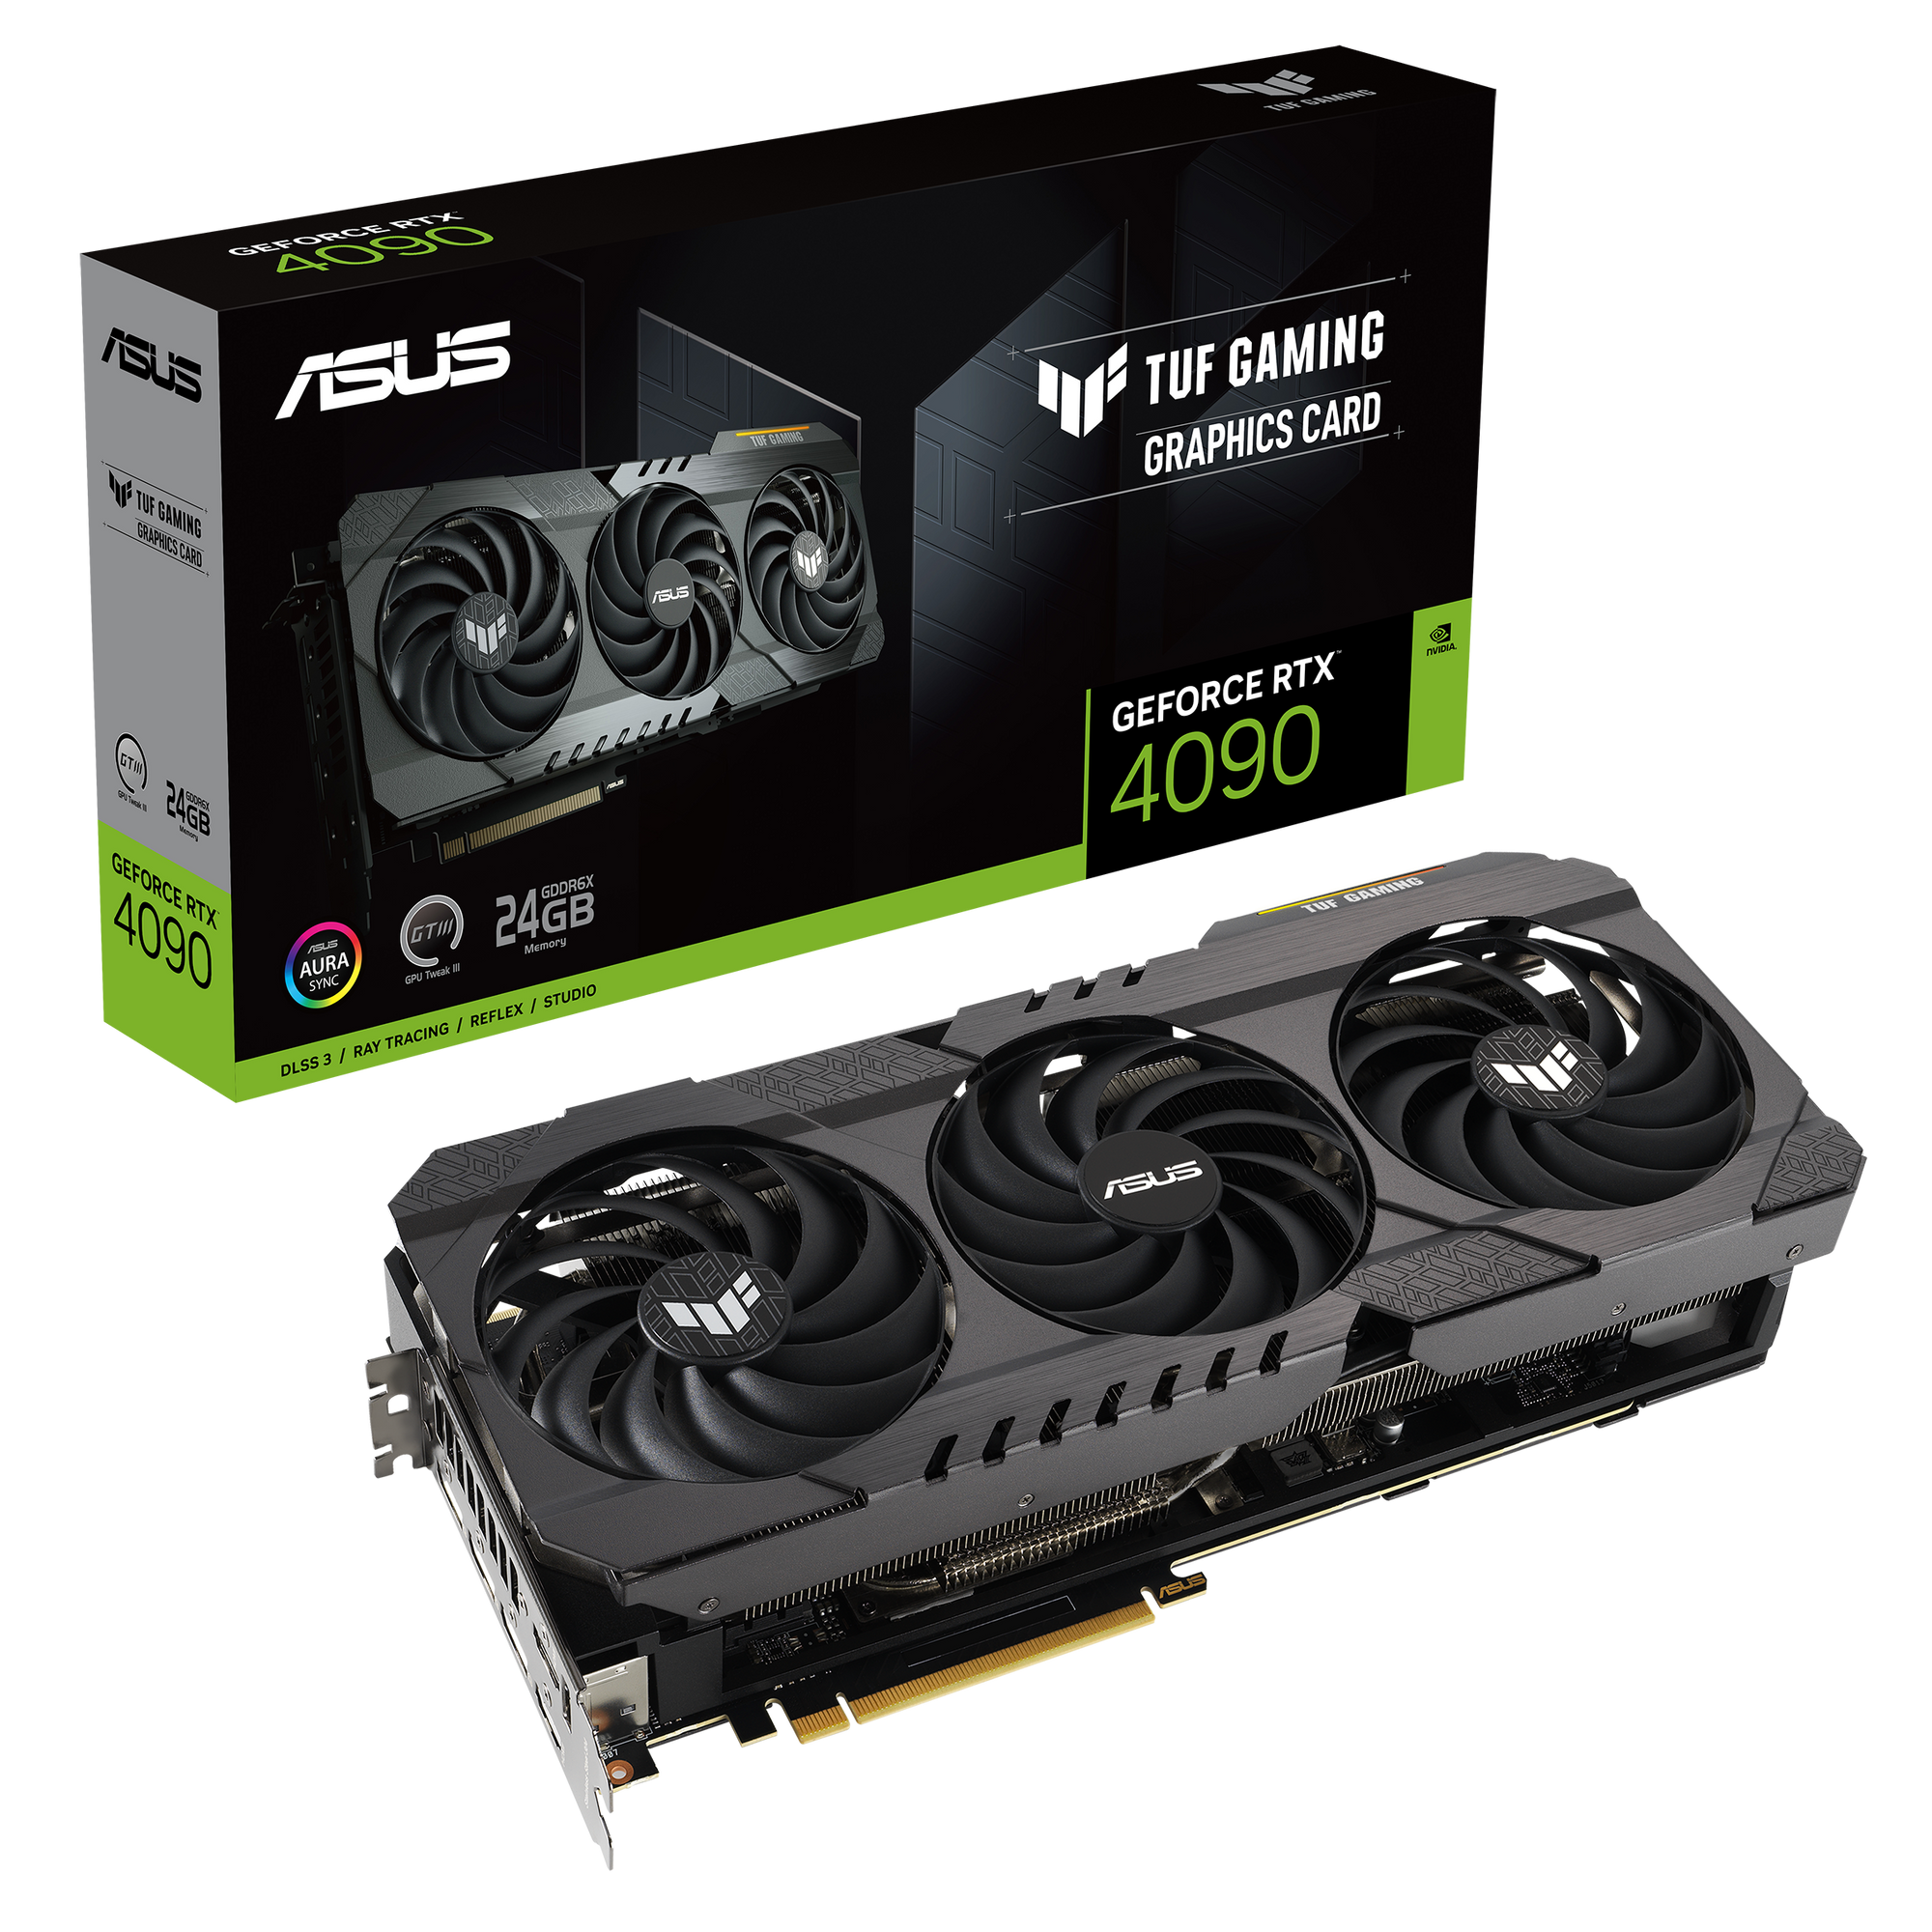 ASUS TUF GeForce RTX 4090 24GB OG Edition Gaming Graphics Card